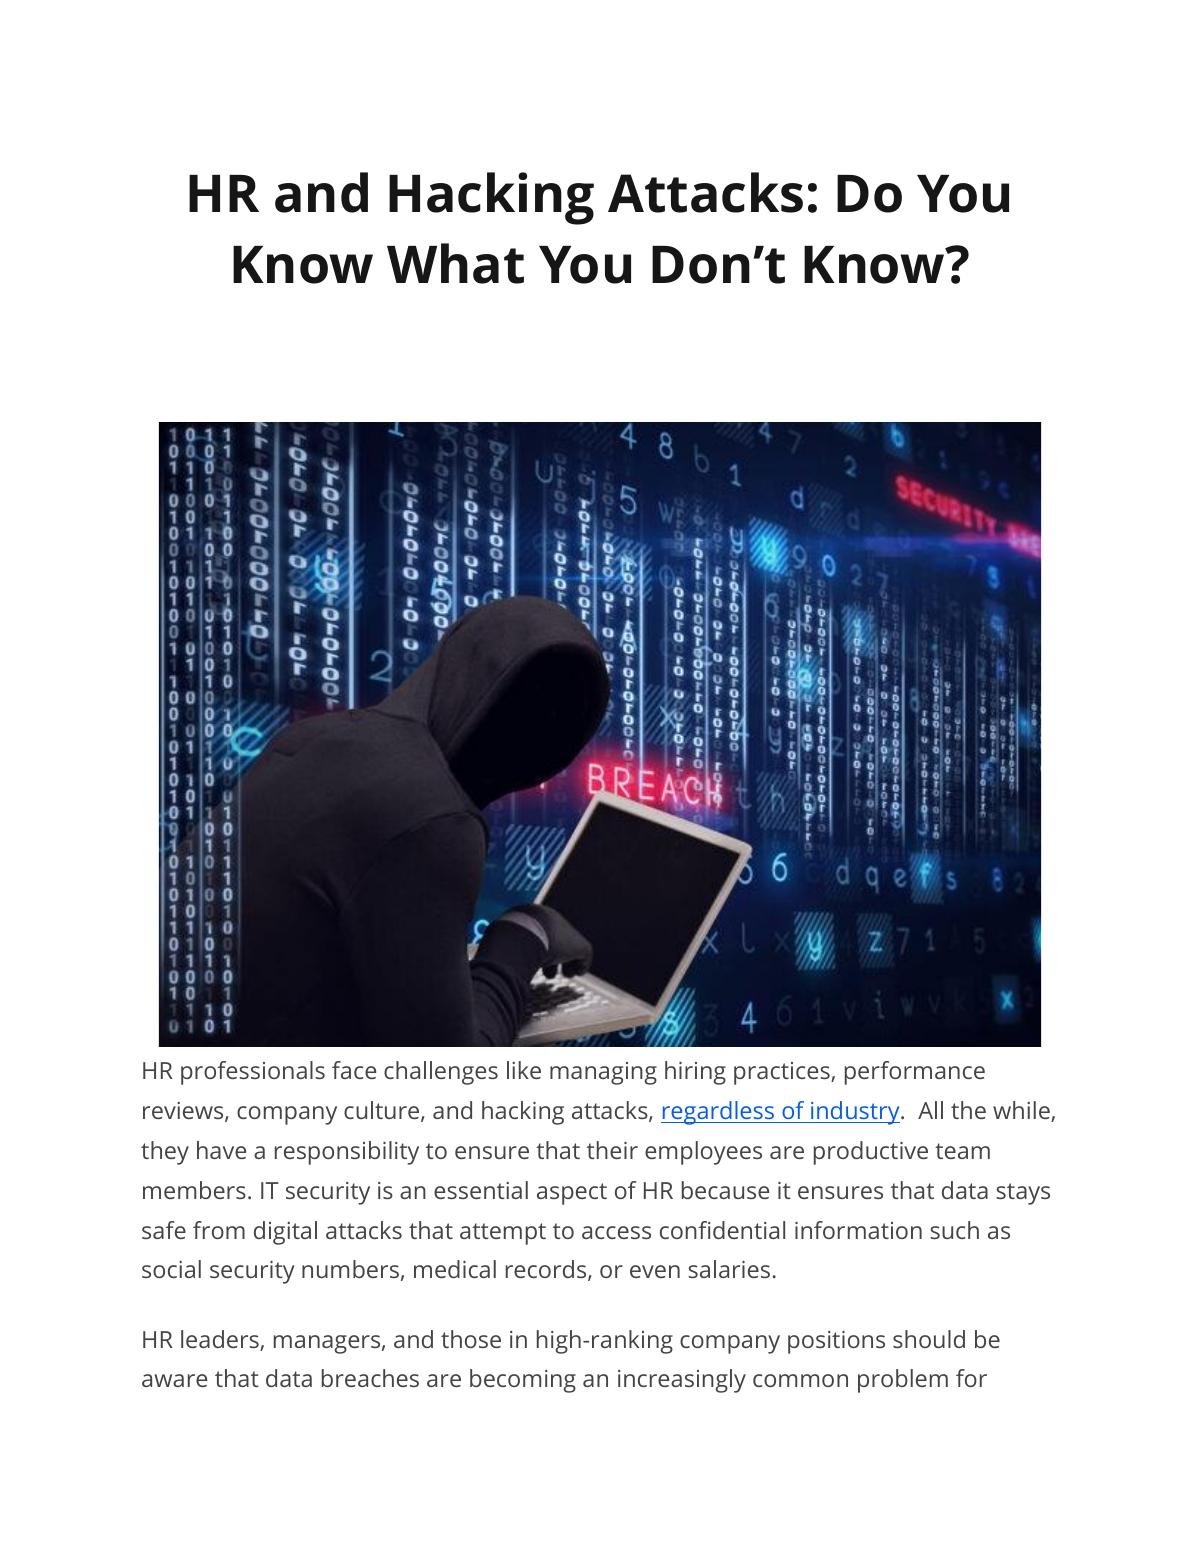 HR and Hacking Attacks: Do You Know What You Don’t Know? 